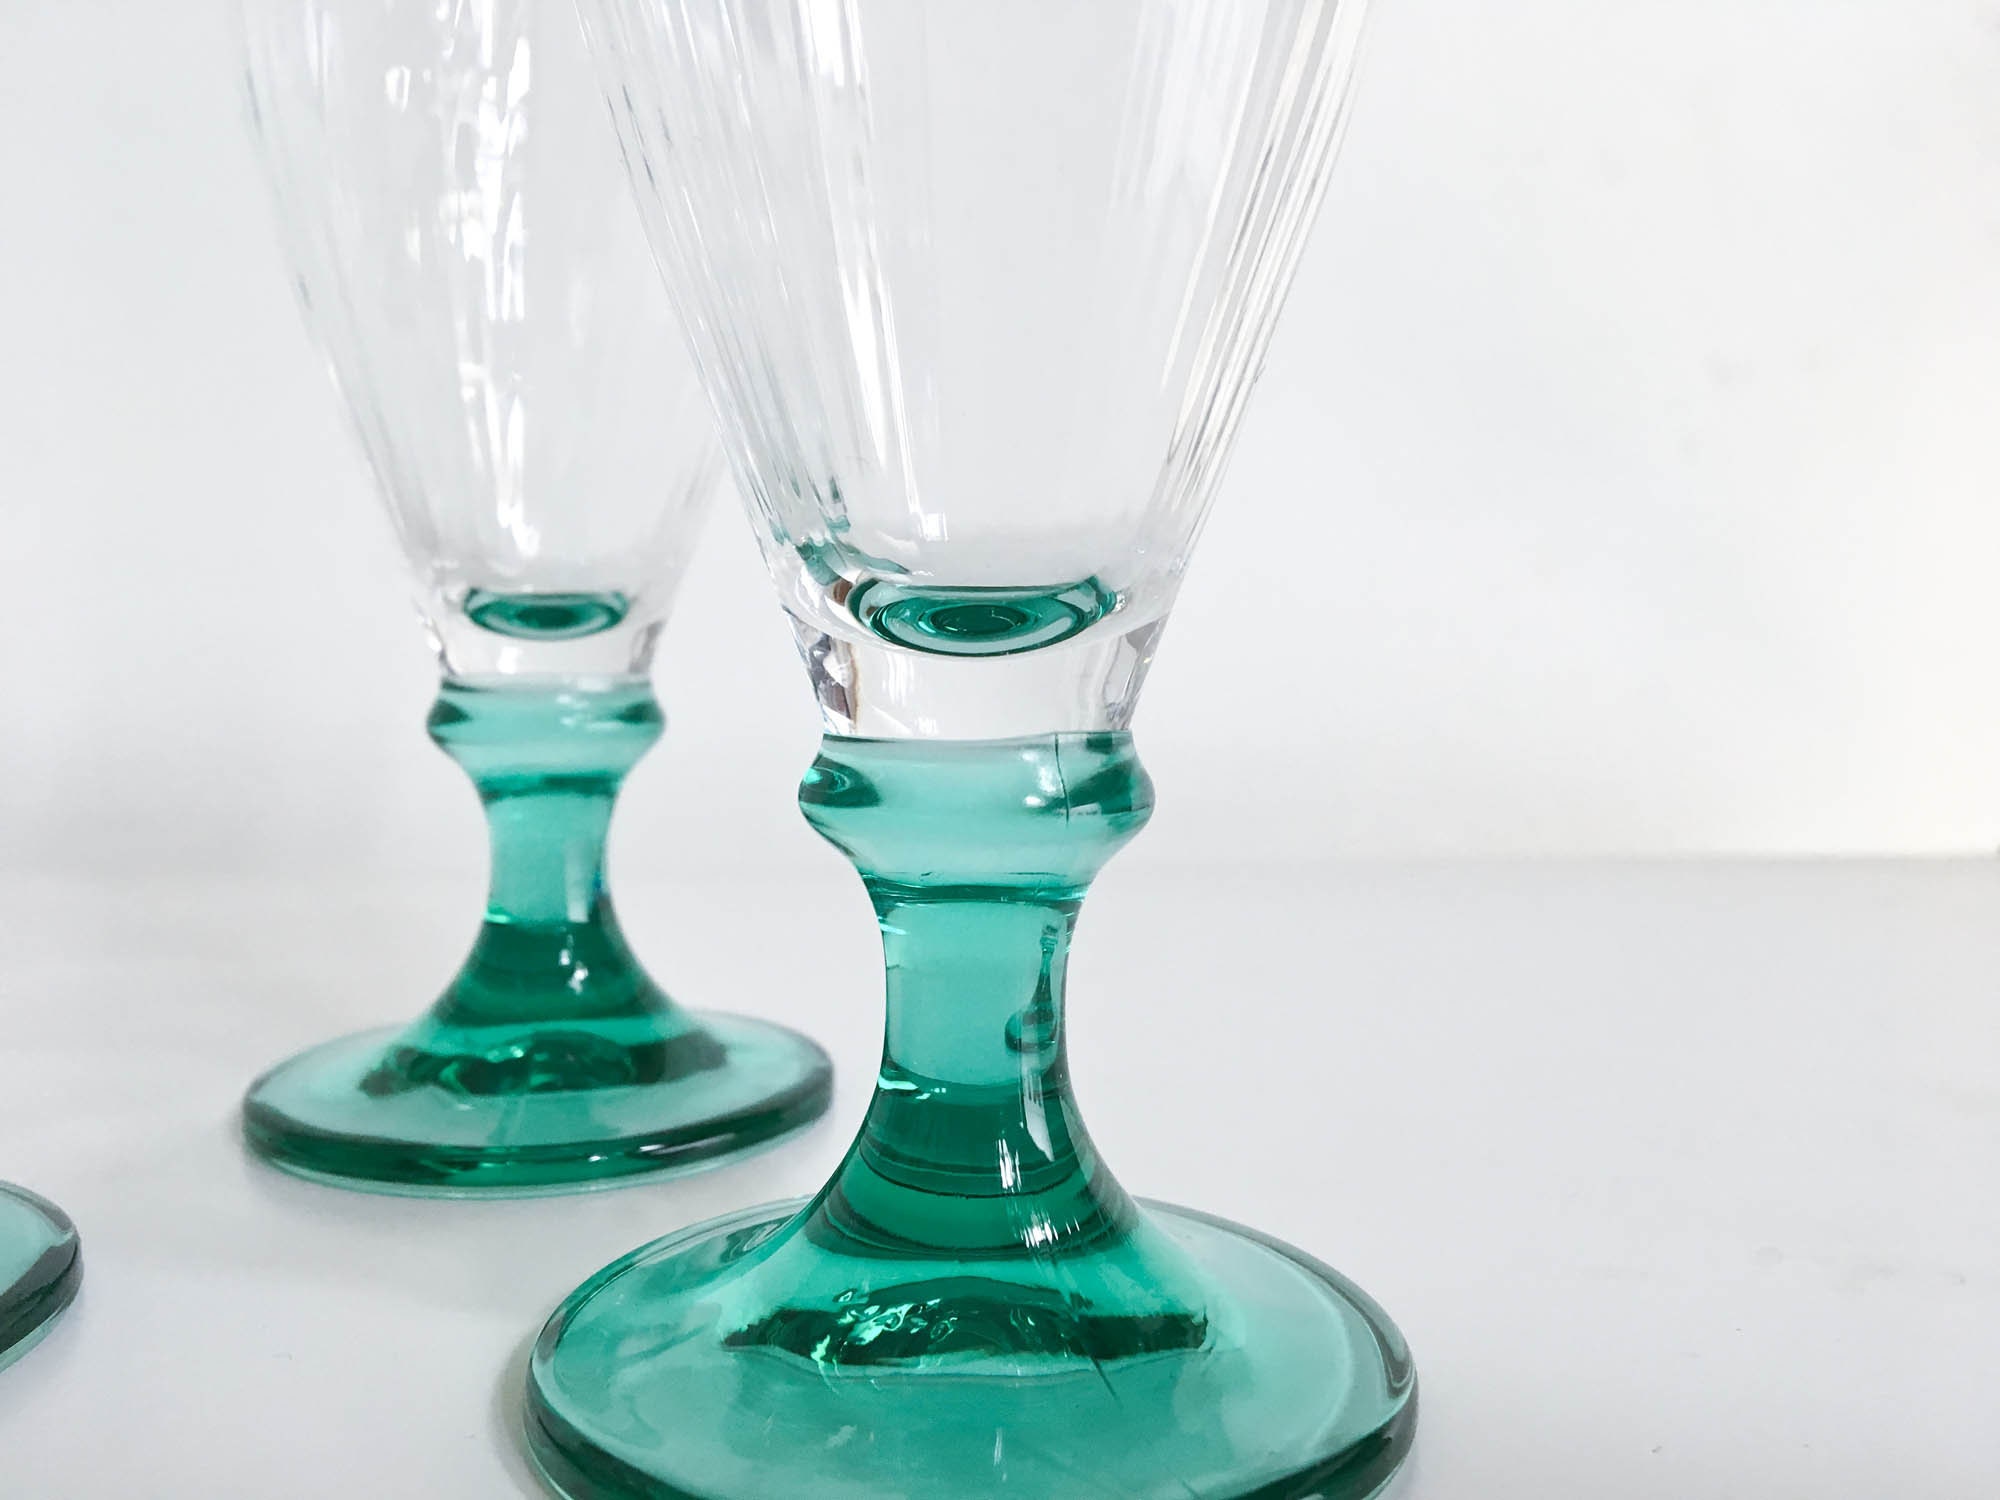 Vintage Murano Glass Cenedese Champagne Flute Wine Glass Goblet - Gold and Aqua Green